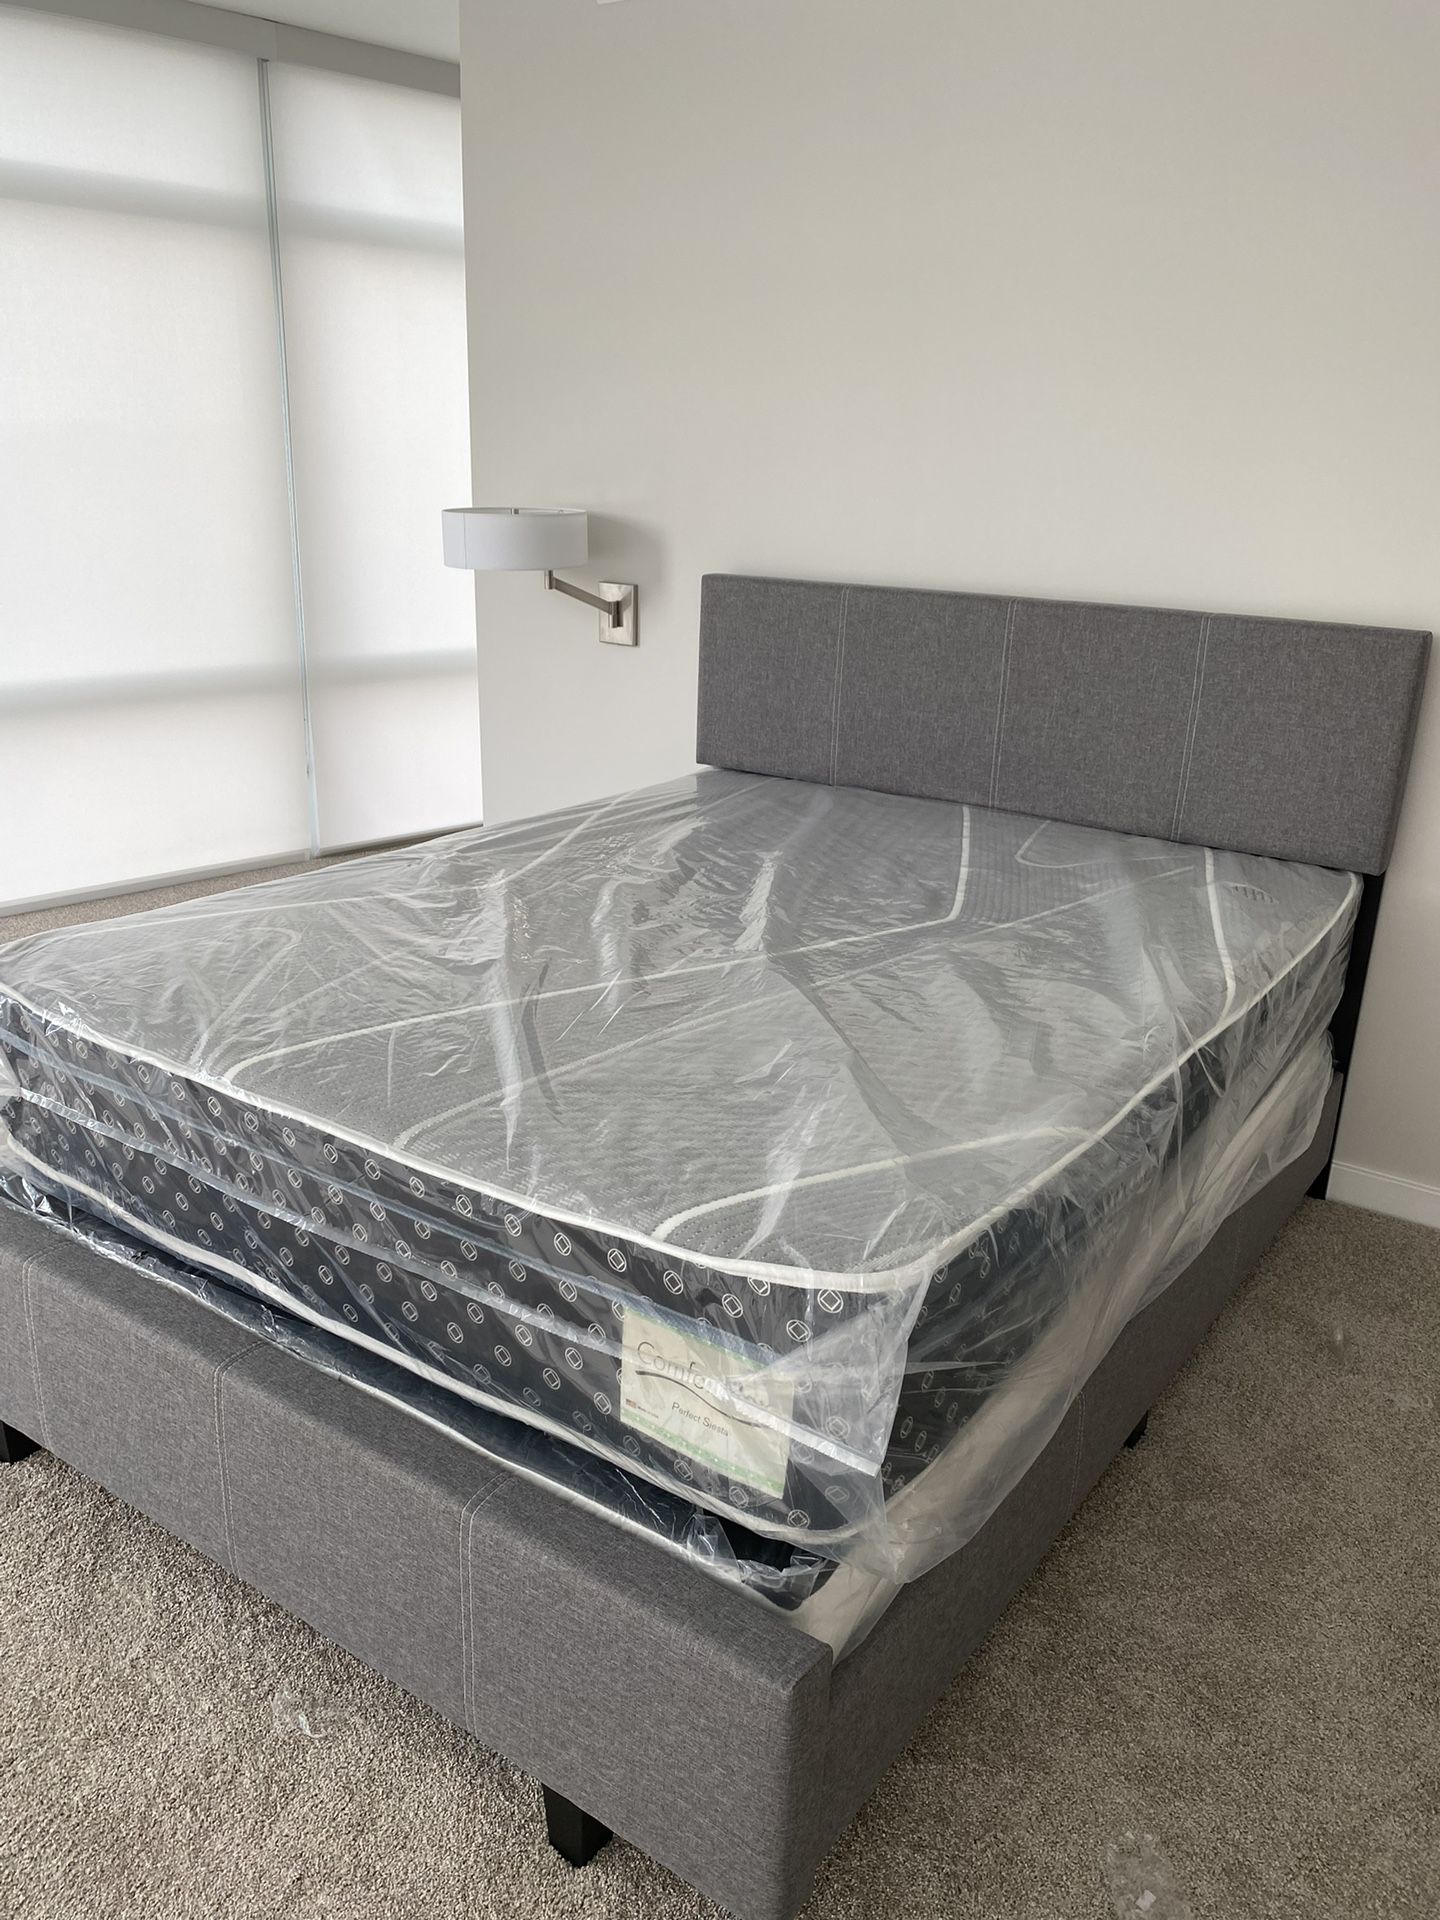 Queen Mattress Come With Headboard & Footboard And Box Spring - Same Day Delivery 